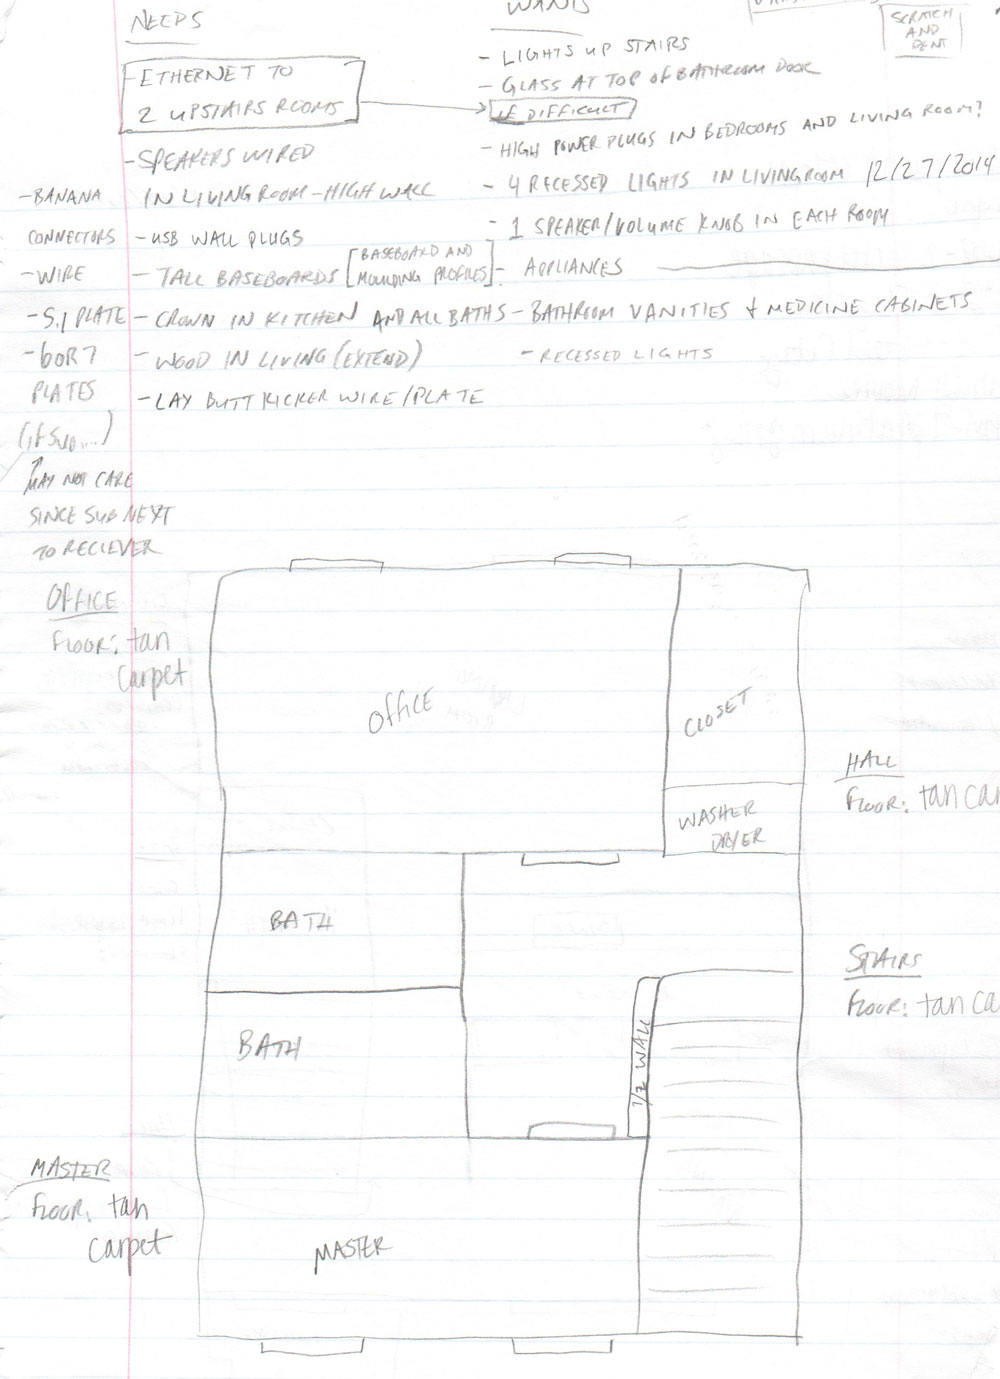 Second Floor and List of Needs and Wants